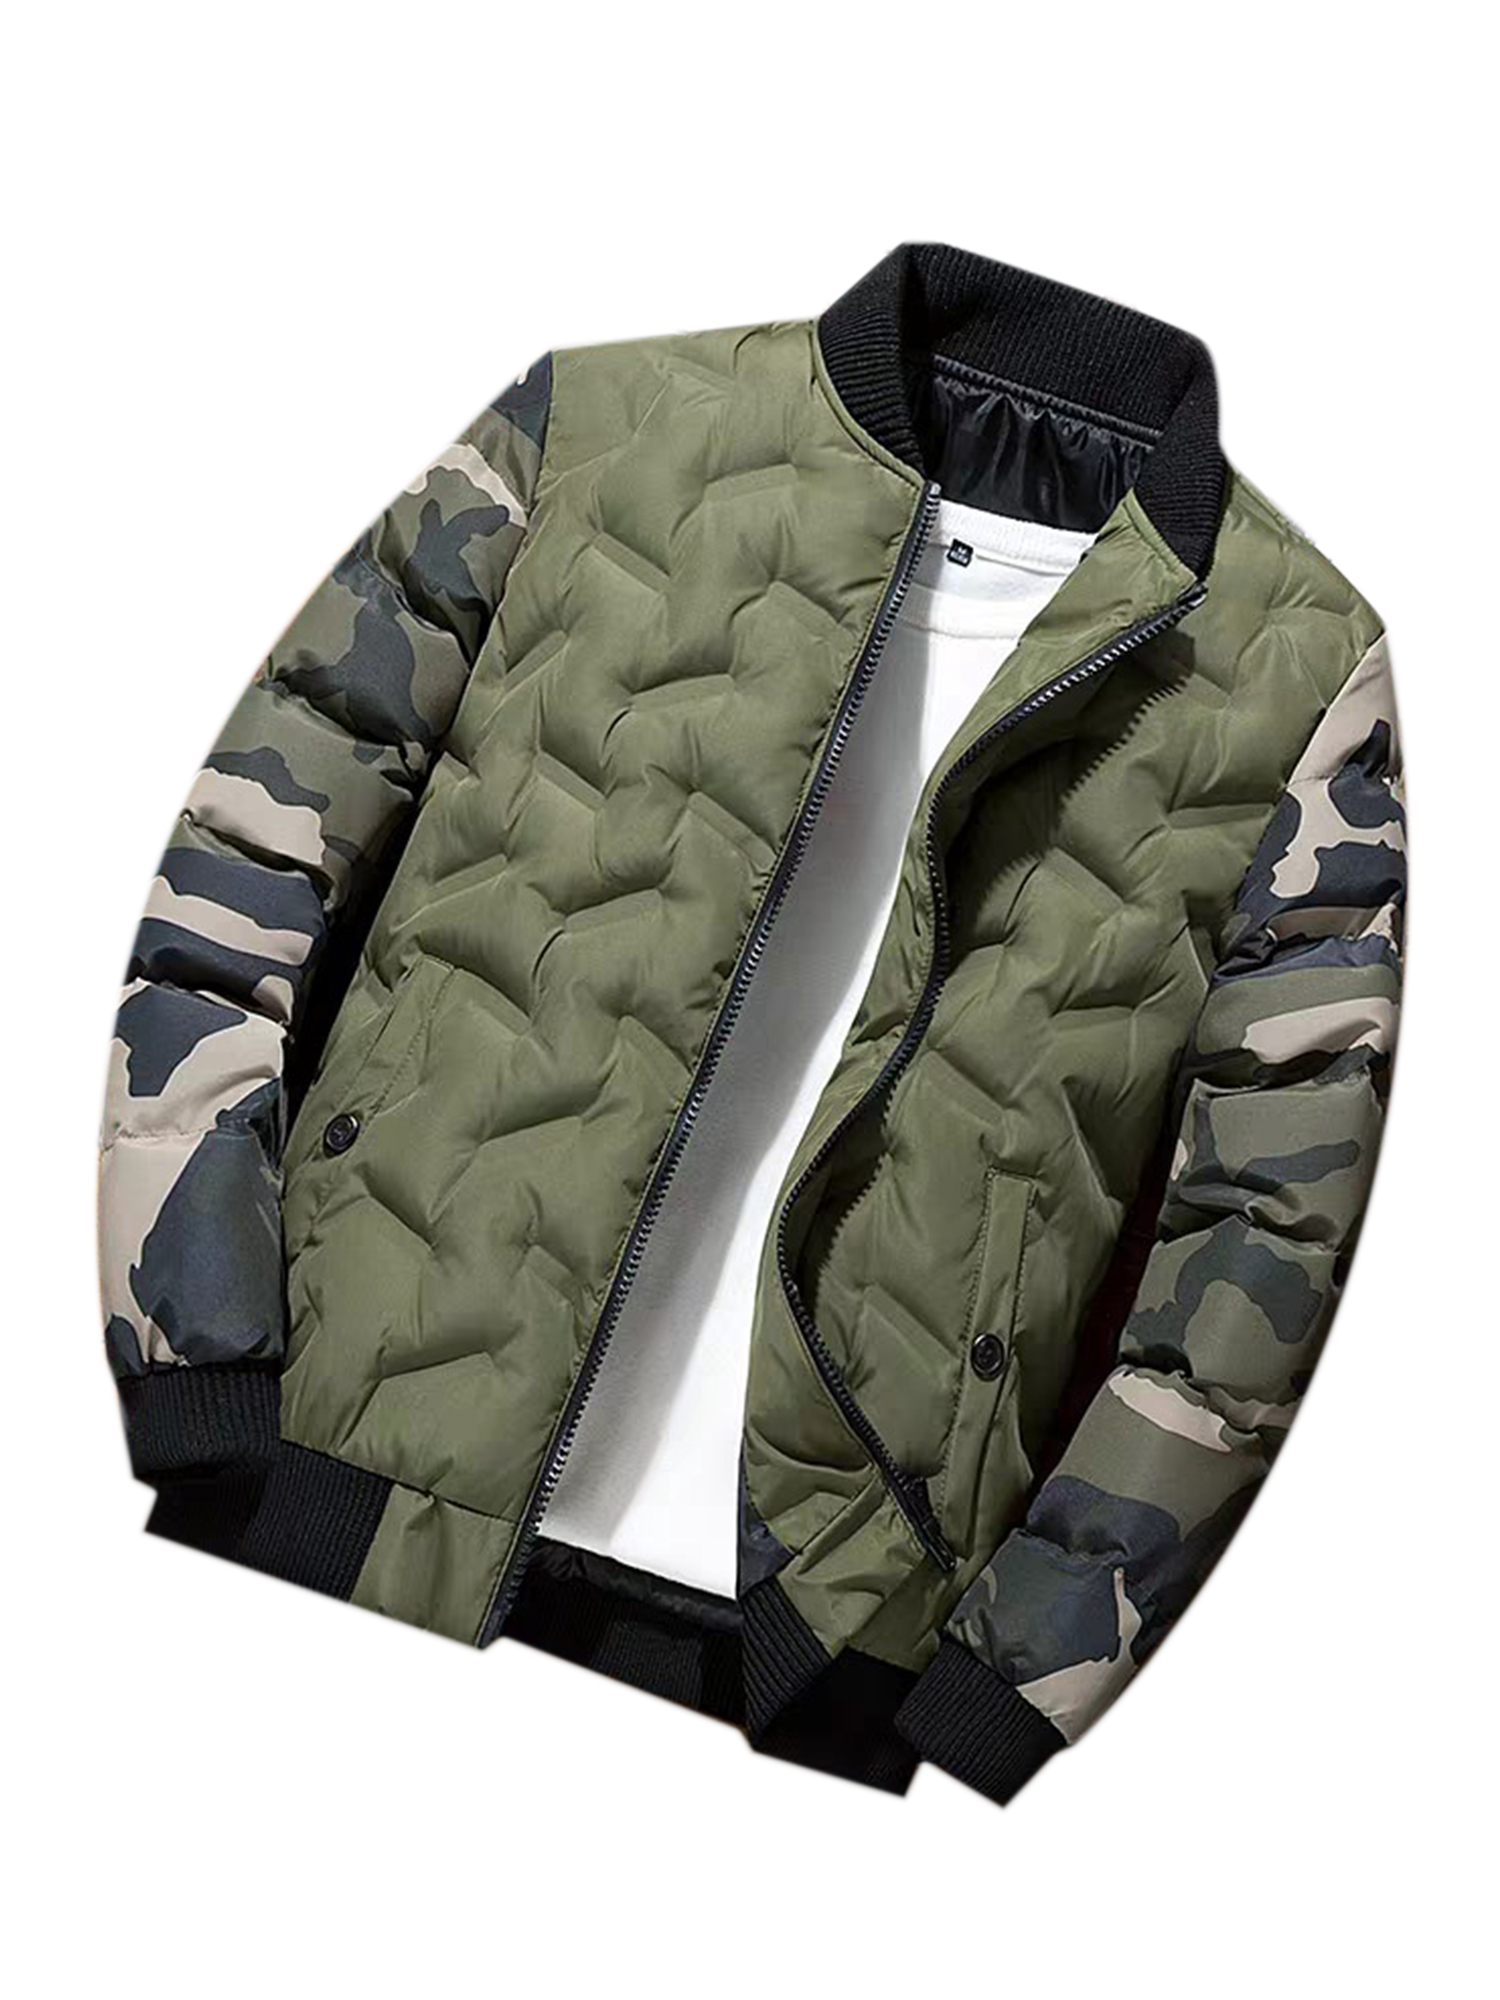 UKAP Mens Plus Size Insulated Letterman Jacket Thickened Varsity Jacket with Camo Sleeves Stand Collar for Winter Outerwear - image 1 of 4